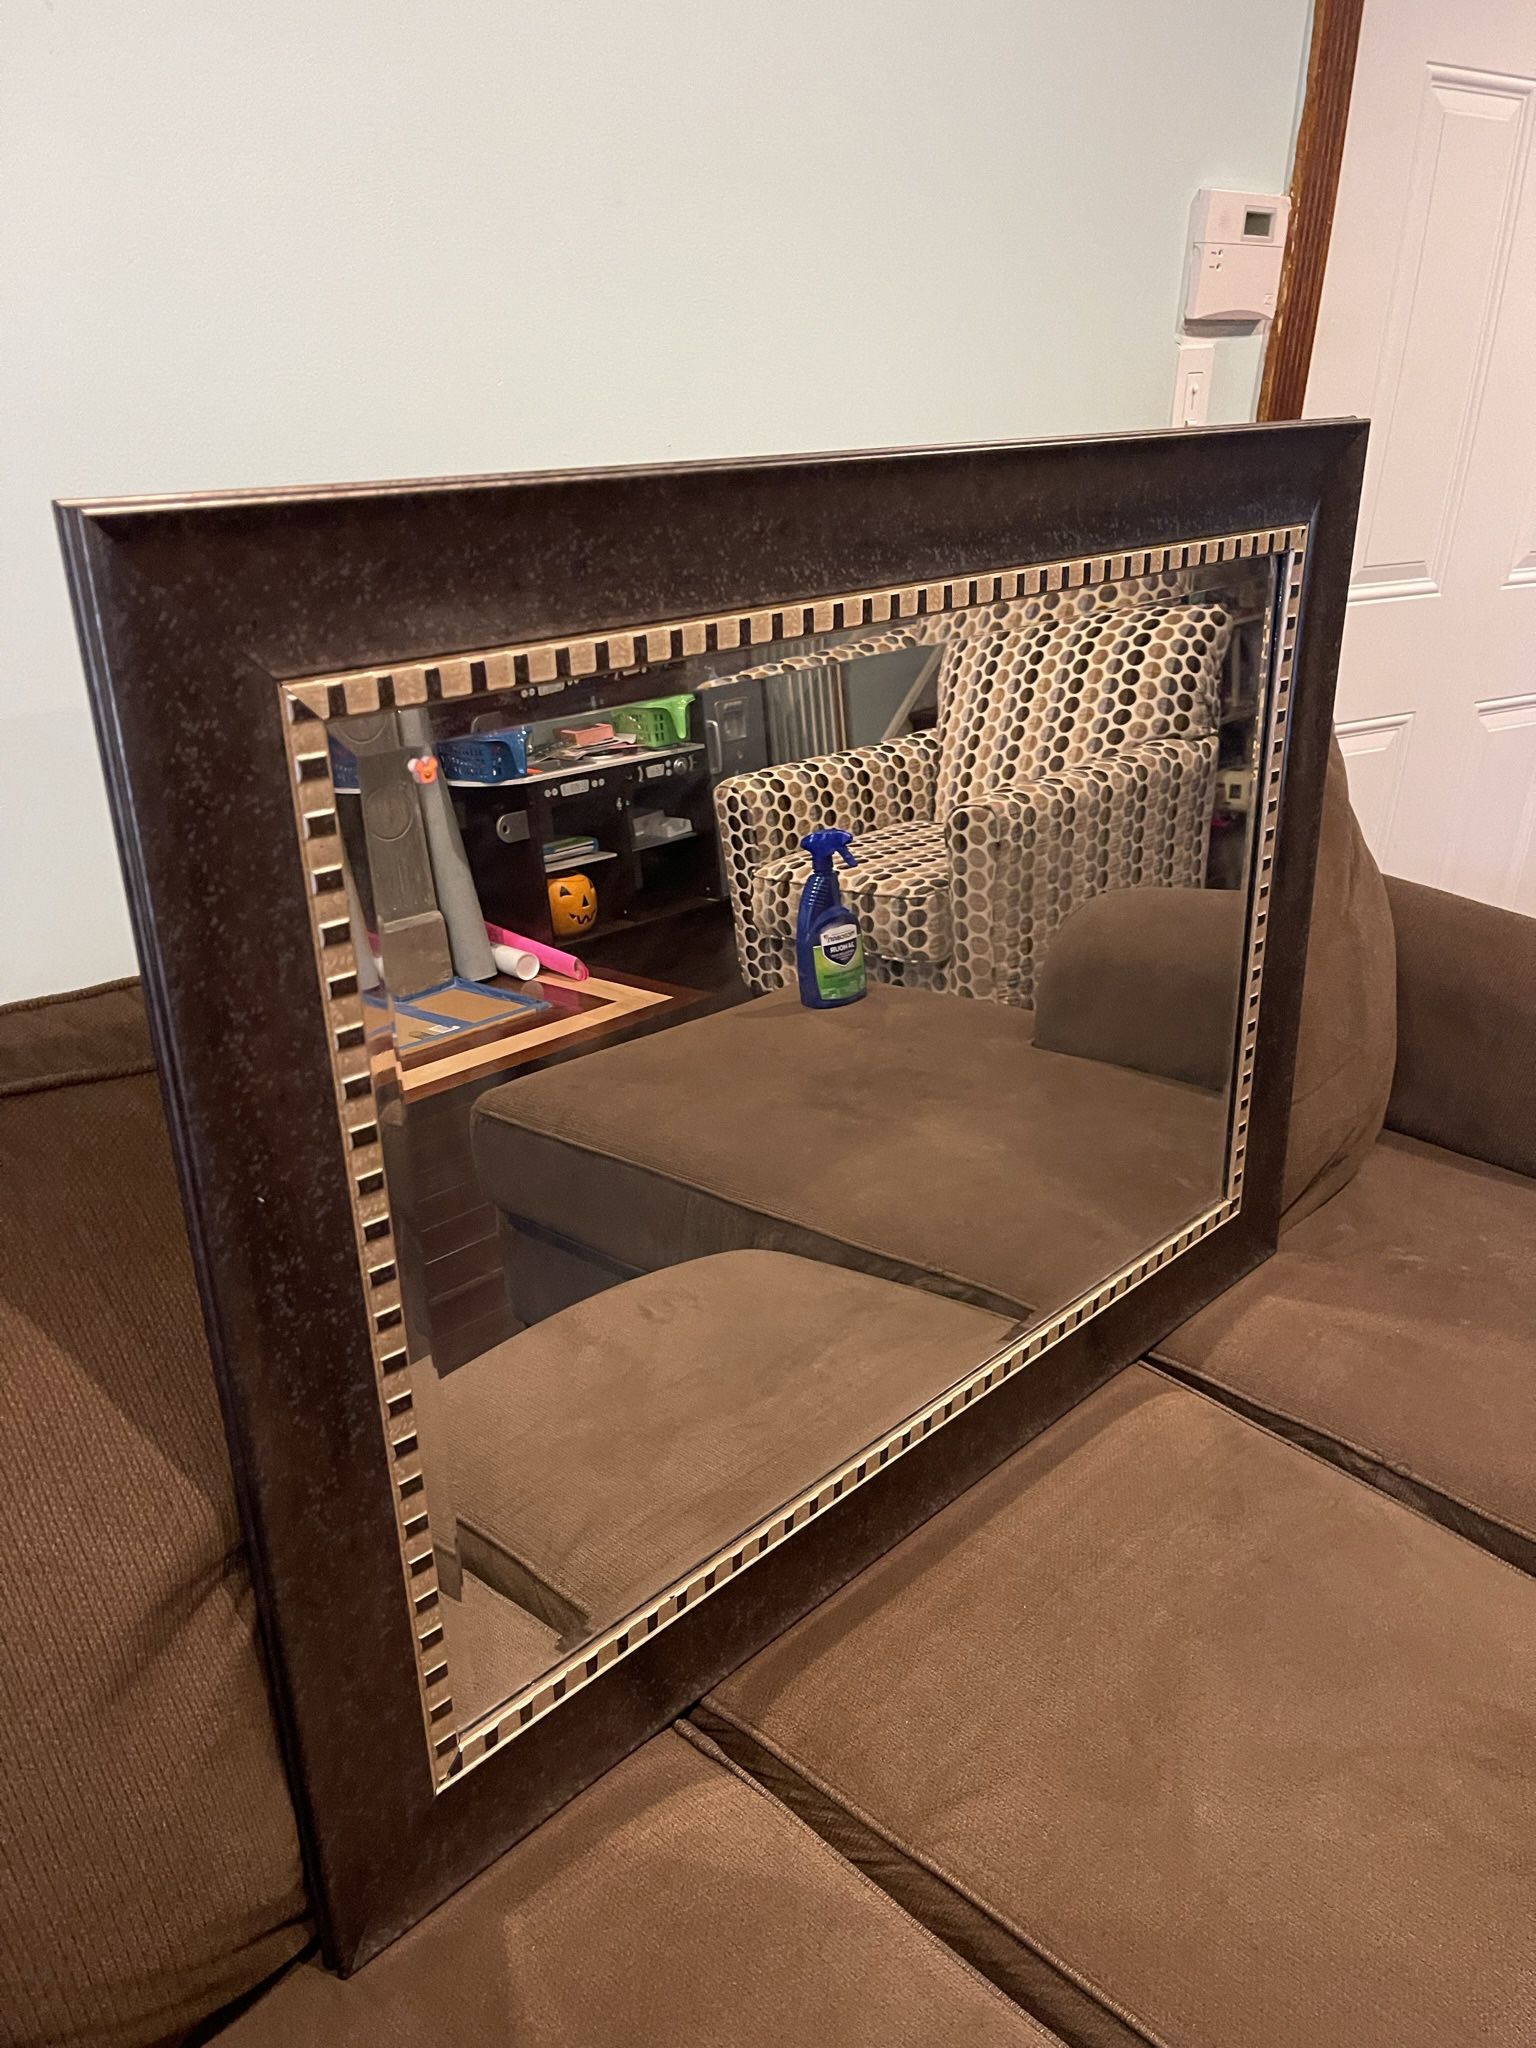 Cool Antique-ish Mirror. Perfect Condition. No Scratches Or Blemishes. Negotiable.